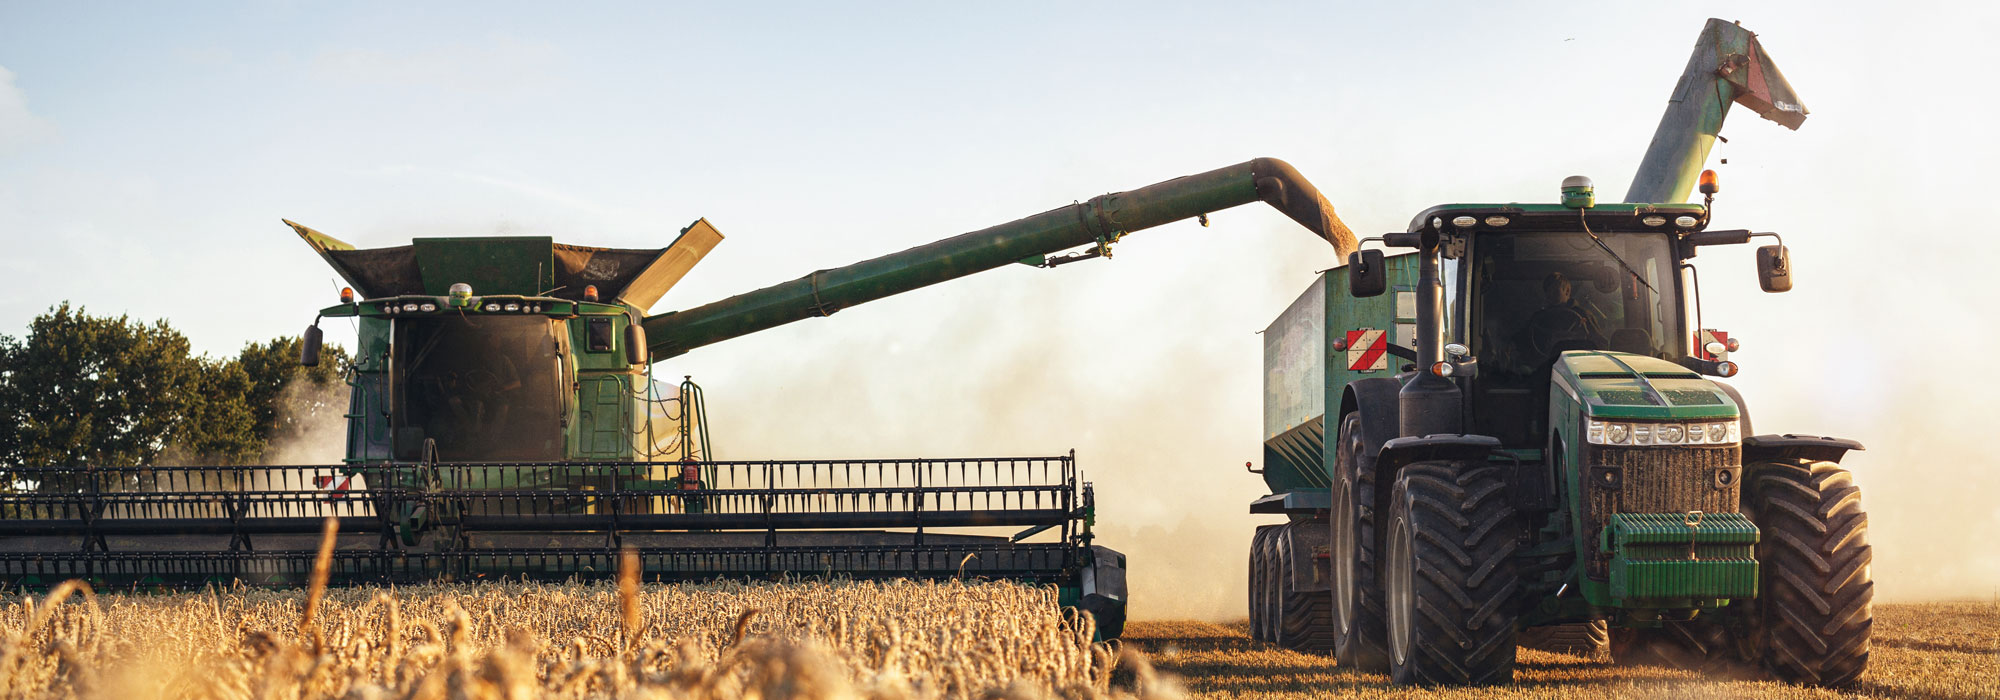 Farming Equipment Dealing With Crops